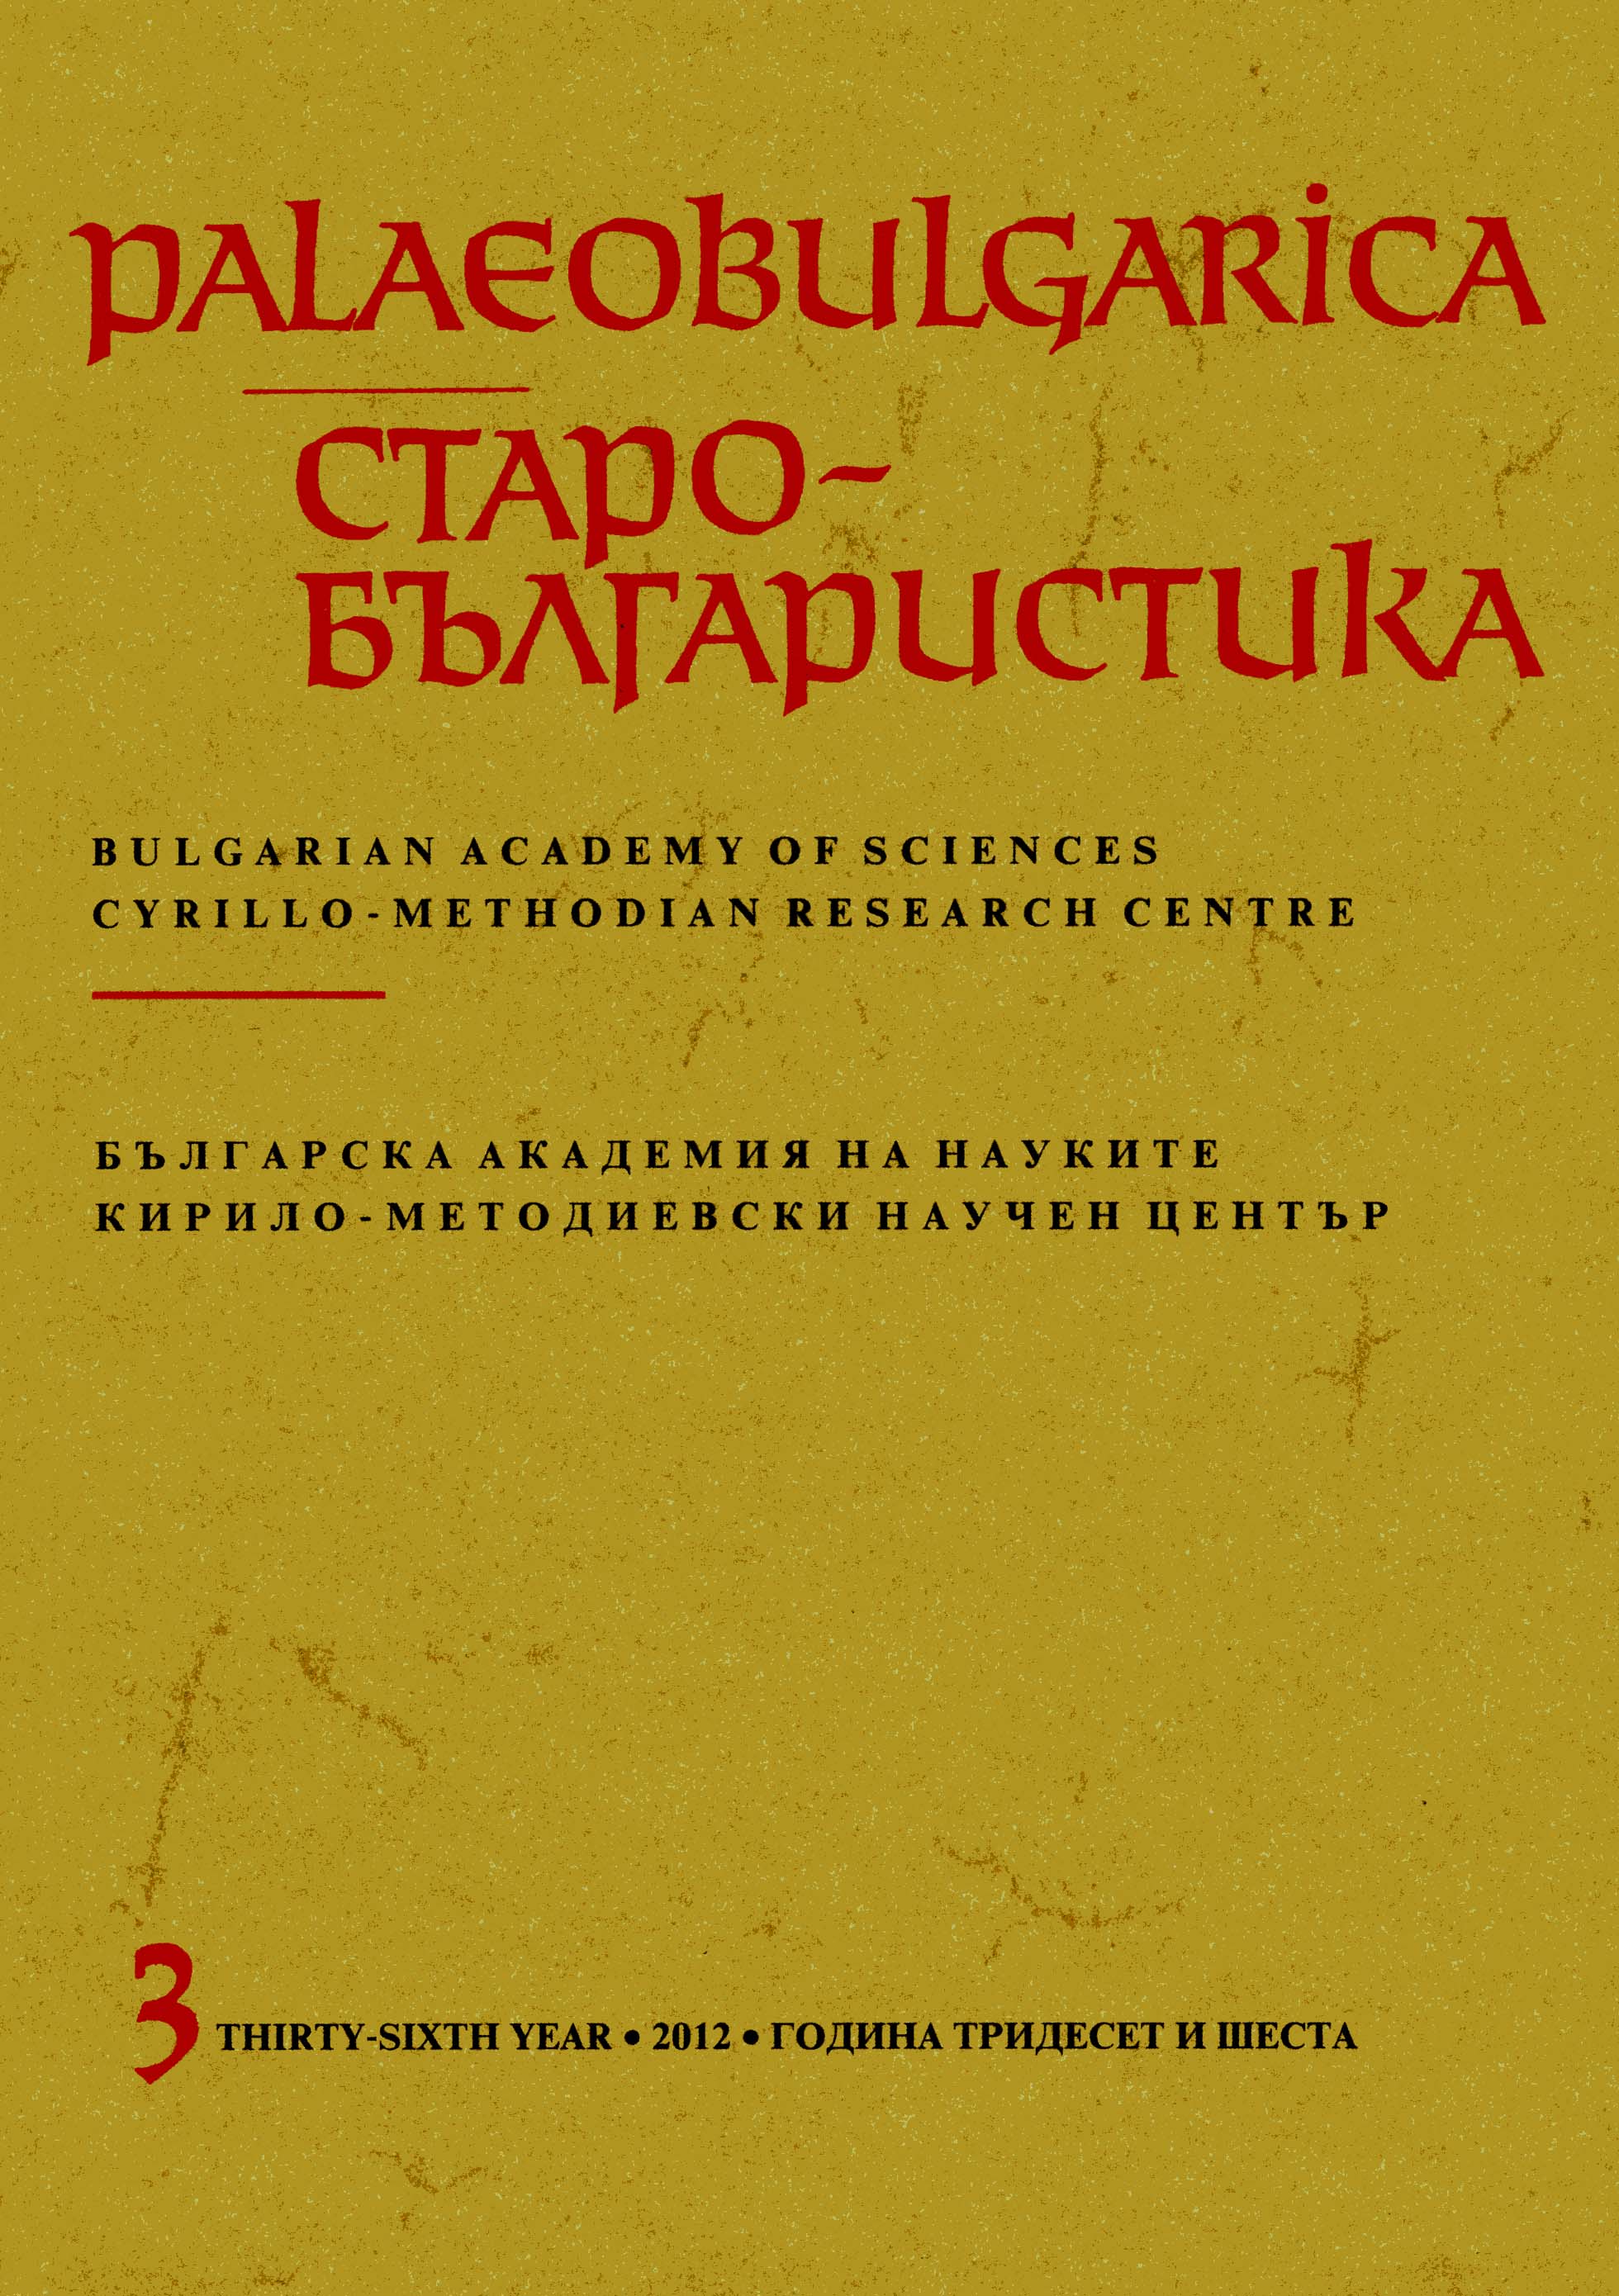 About Two 10th Century Manuscripts Illuminated in 'Blütenblatt' Style: The Gospels of Berat 4 and Vlorë 5 in the State Public Record Office in Tirana Cover Image